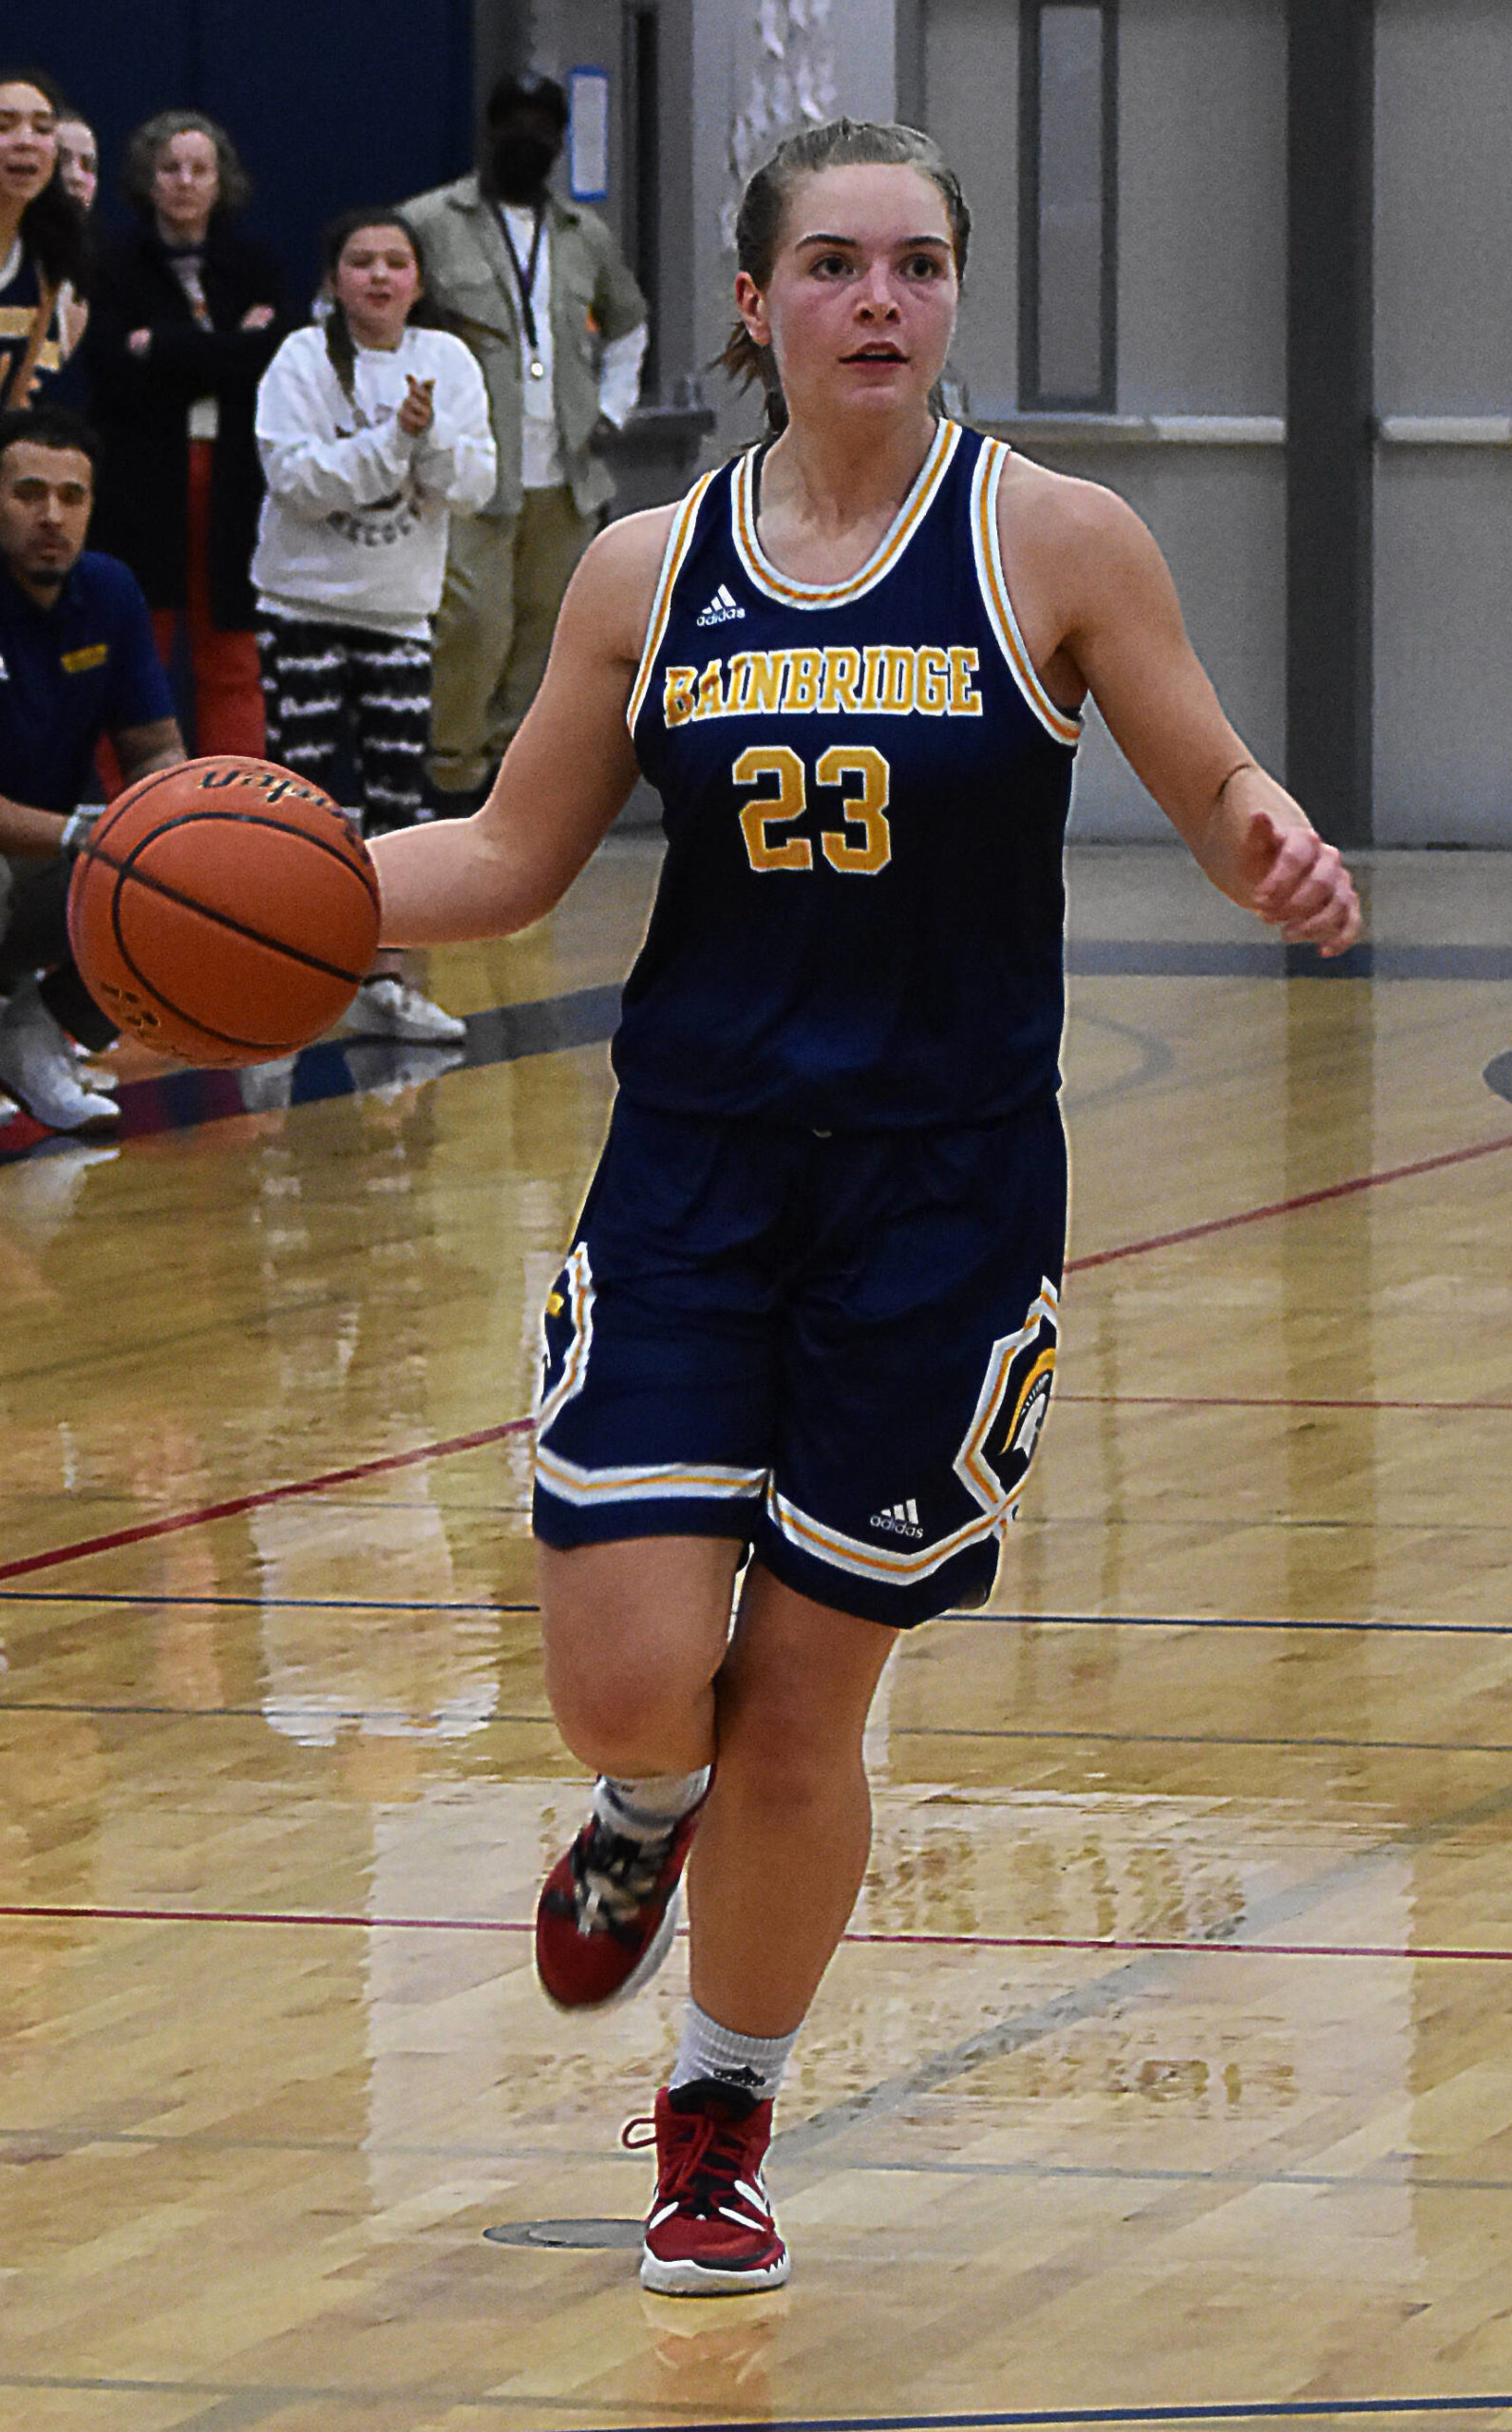 Sierra Berry pushes the ball up the court for Bainbridge.